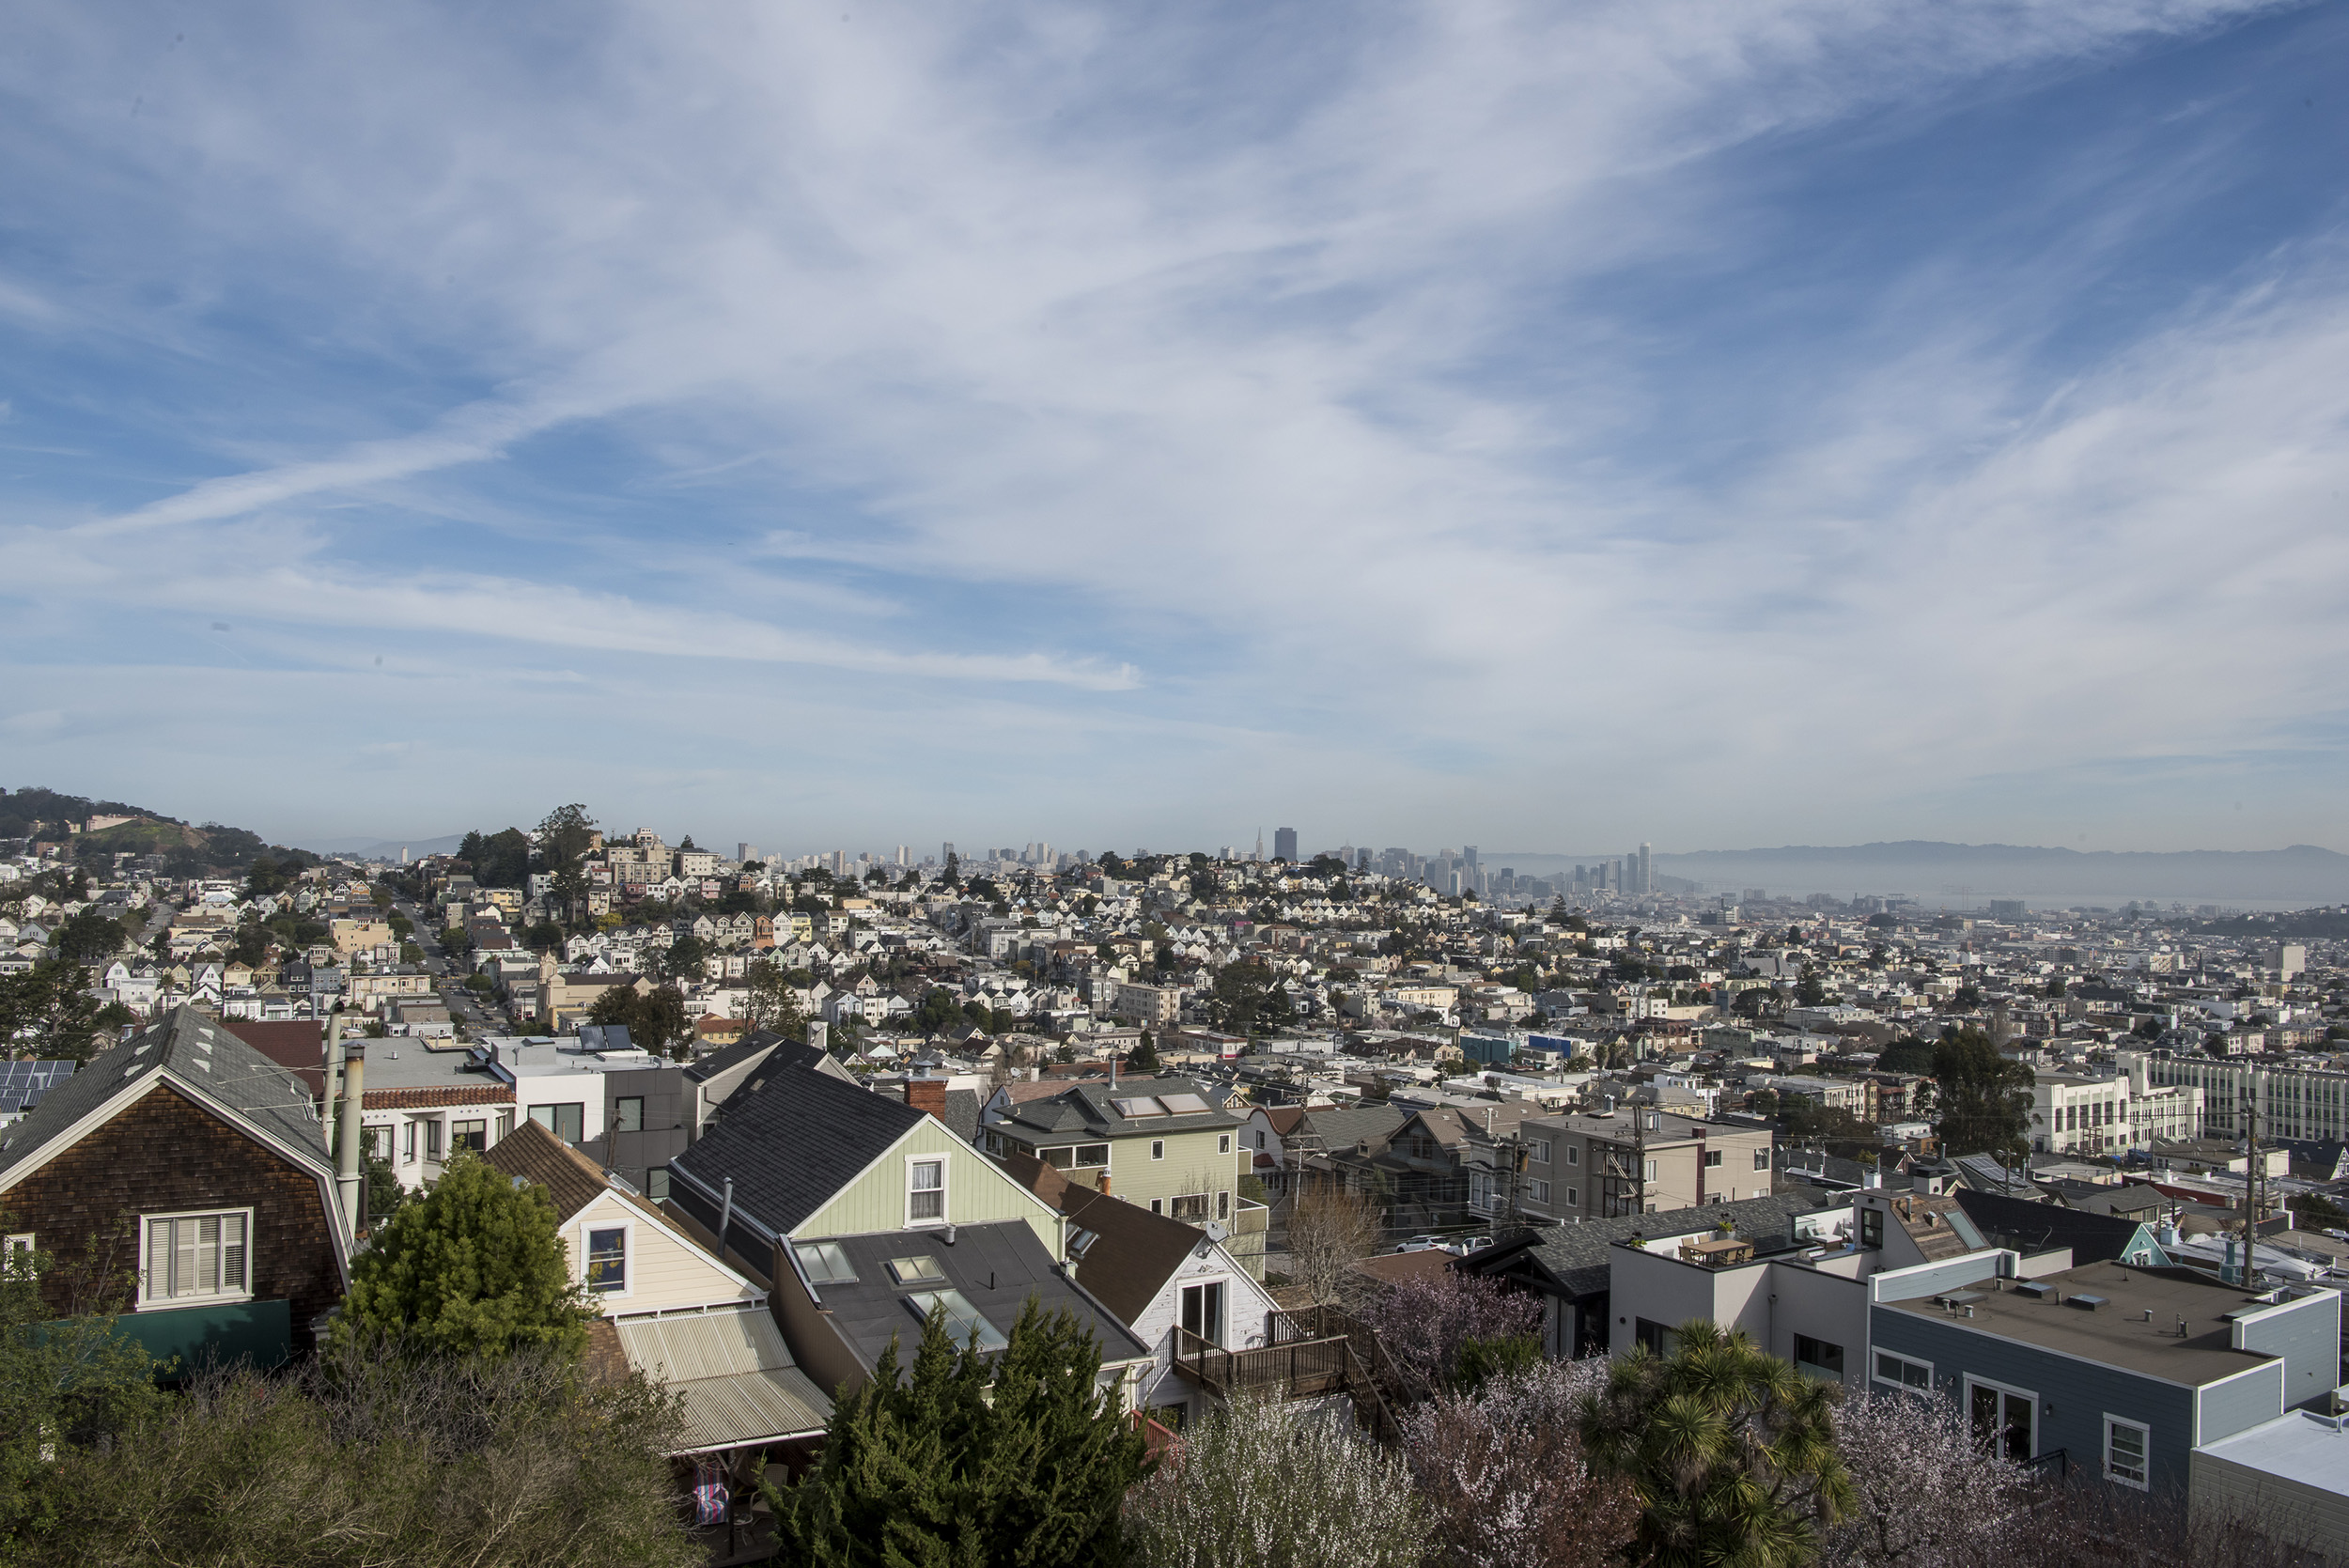 City skyline views from a house listed at US$ 5.49 million are seen in San Francisco, Calif. on Feb. 12, 2016. (David Paul Morris—Bloomberg/Getty Images)